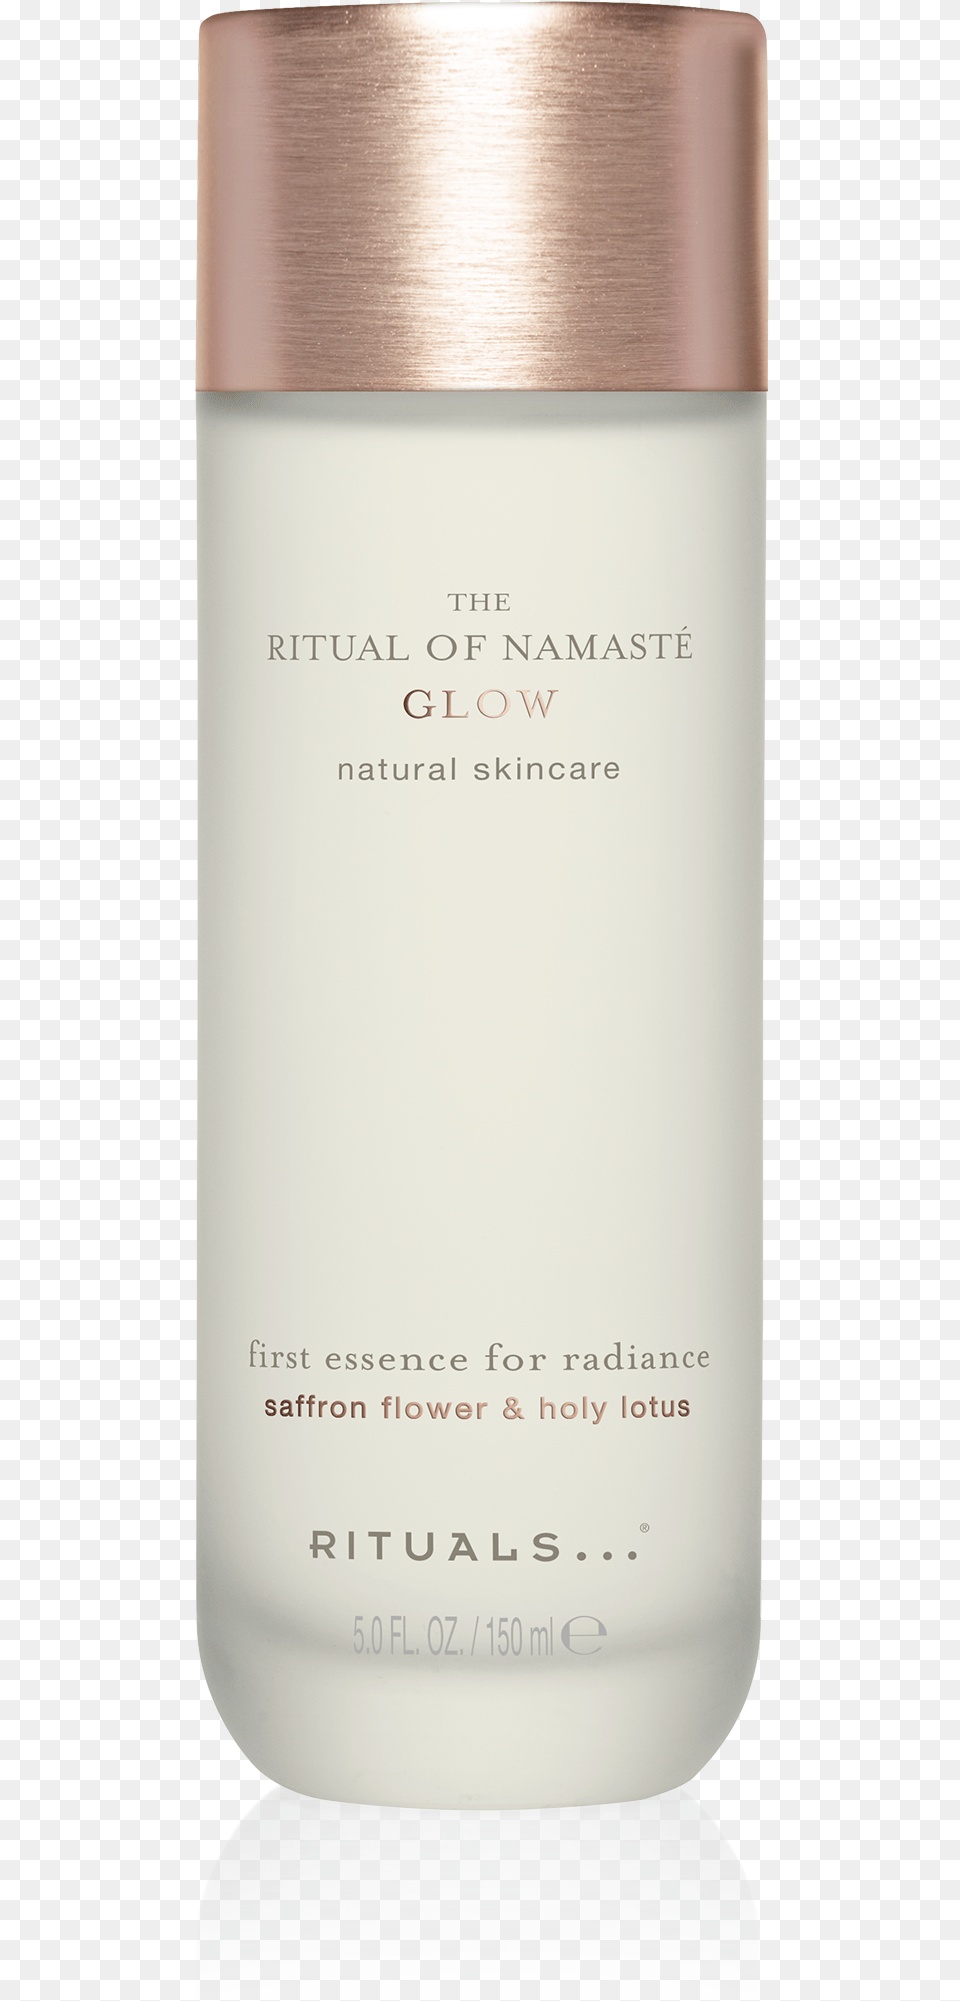 The Ritual Of Namast First Essence For Radiancetitle Bottle, Cosmetics Png Image